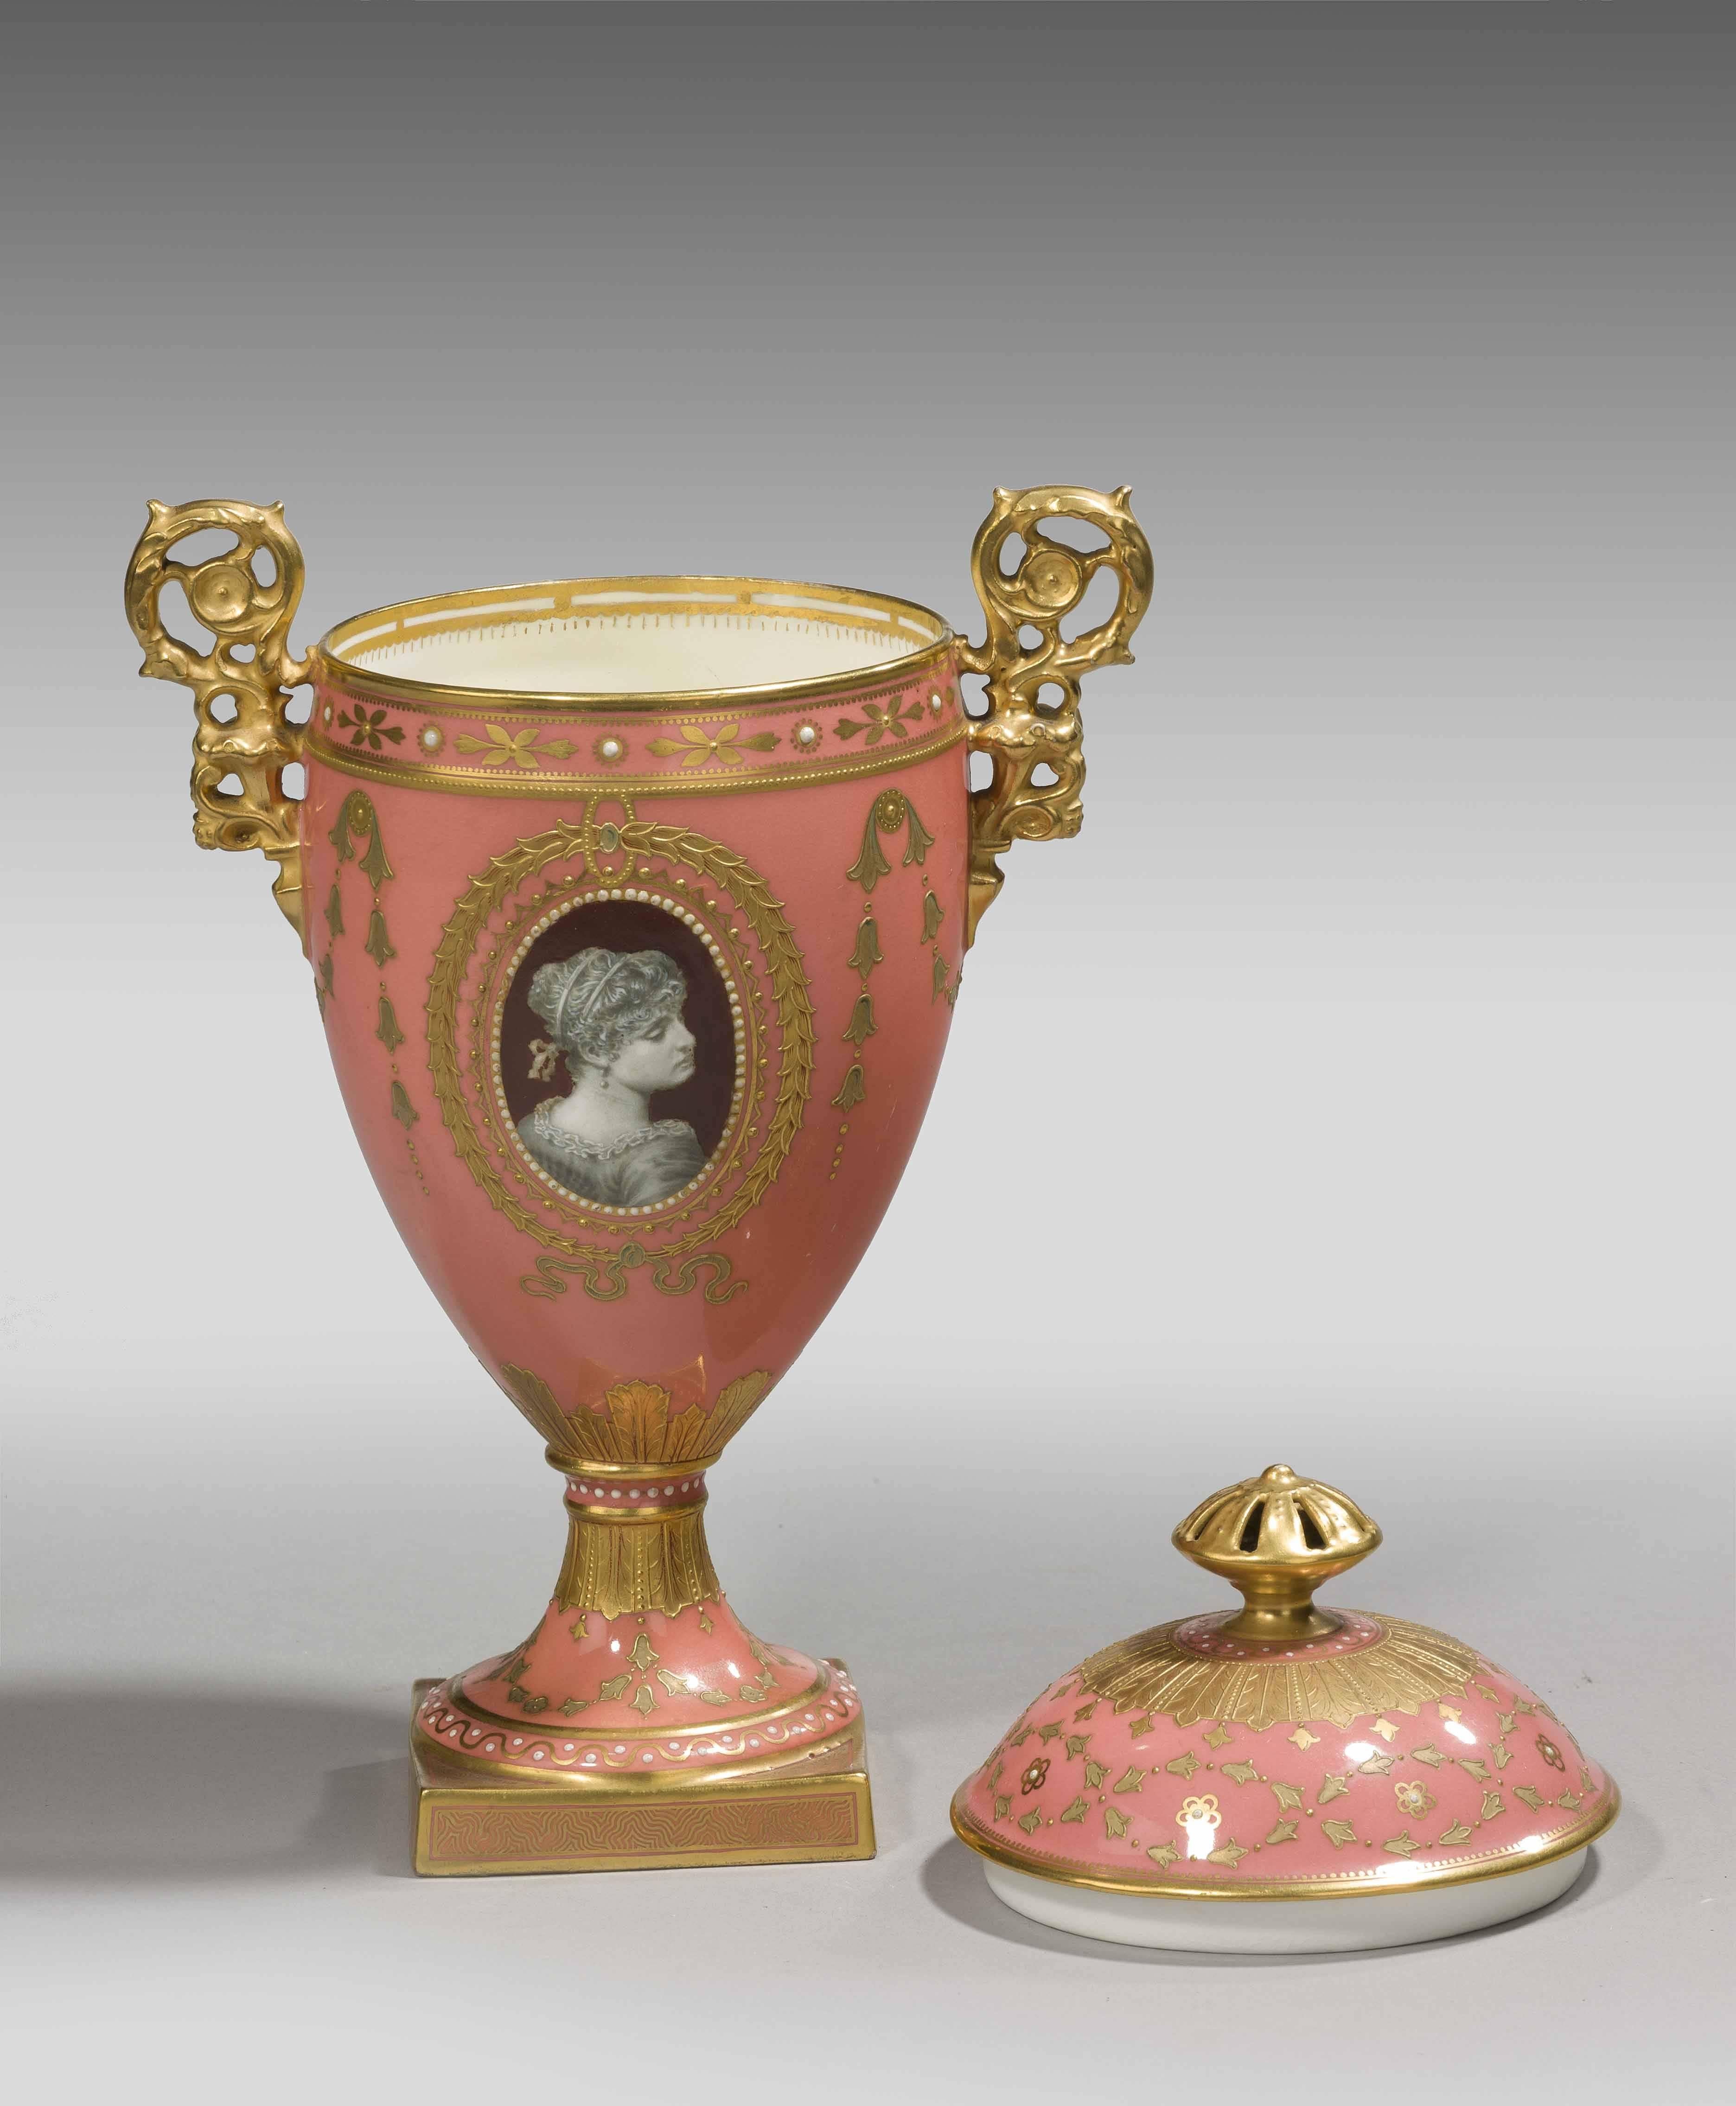 A fine 19th century Derby lidded vase, jewelled with reserve panels of young maidens, the vase is unrubbed and overall in very good condition.

The production of Derby porcelain dates from the first half of the 18th century, although the